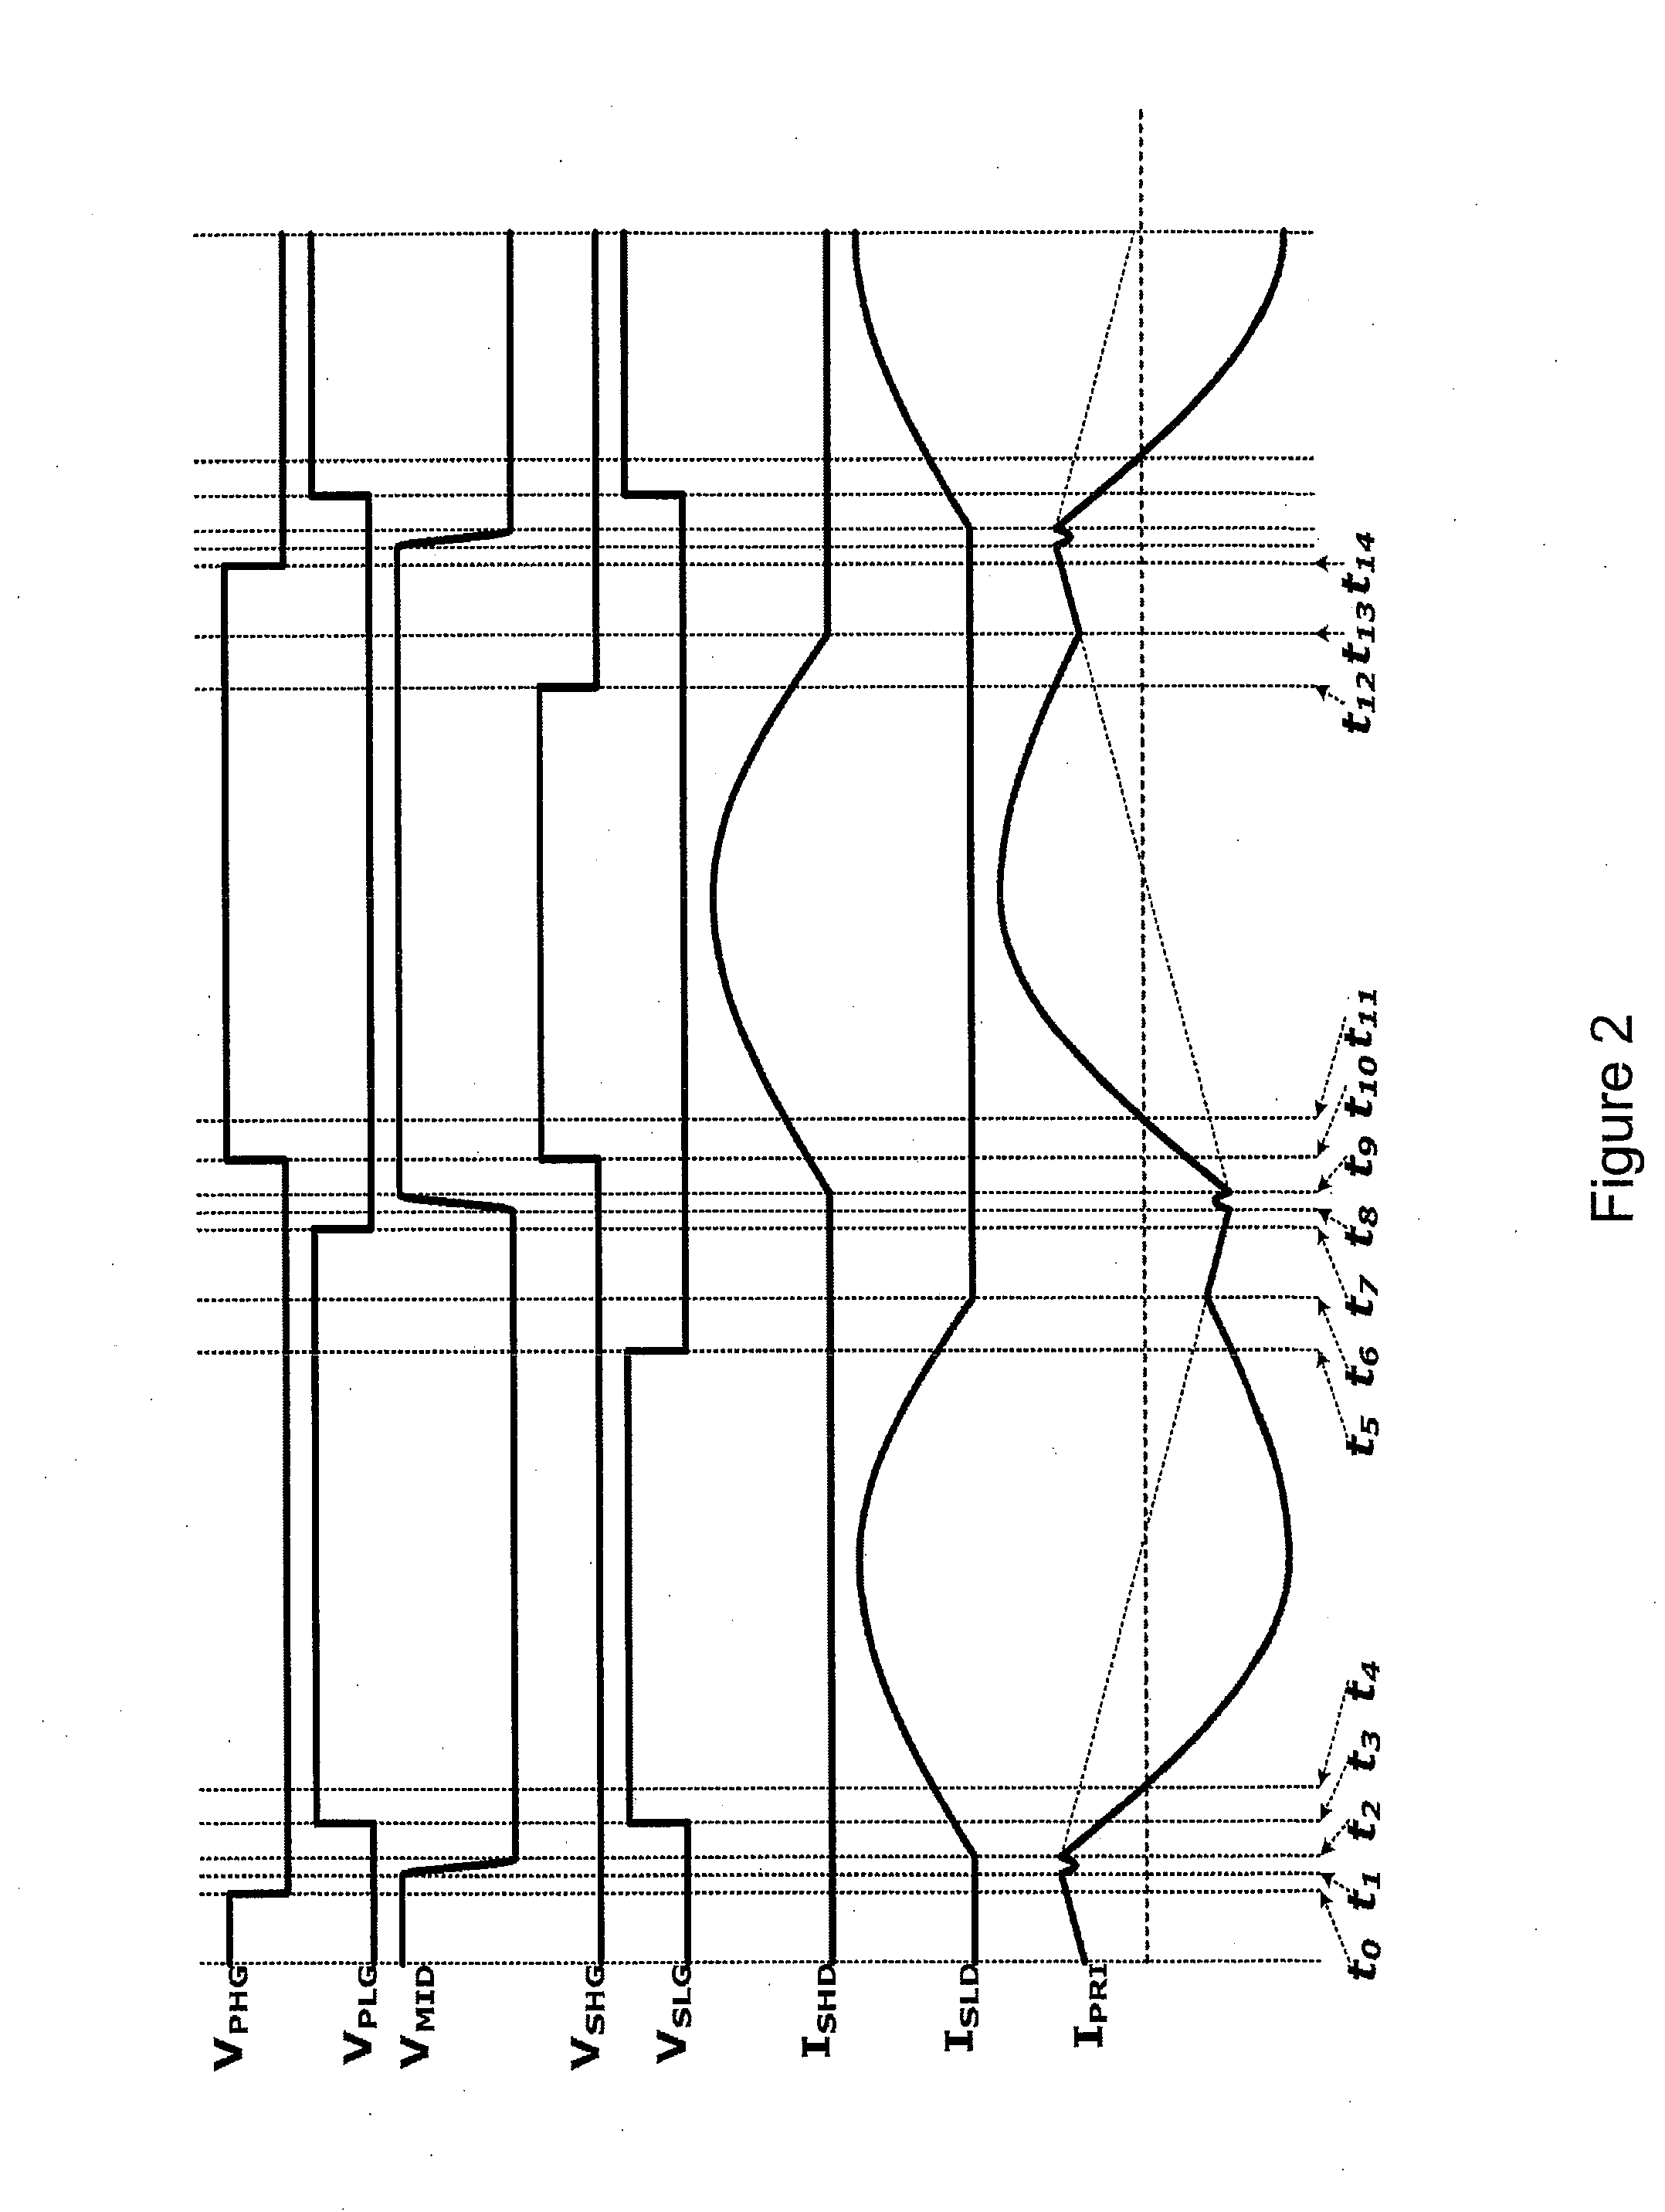 Controller for a Resonant Switched-Mode Power Converter